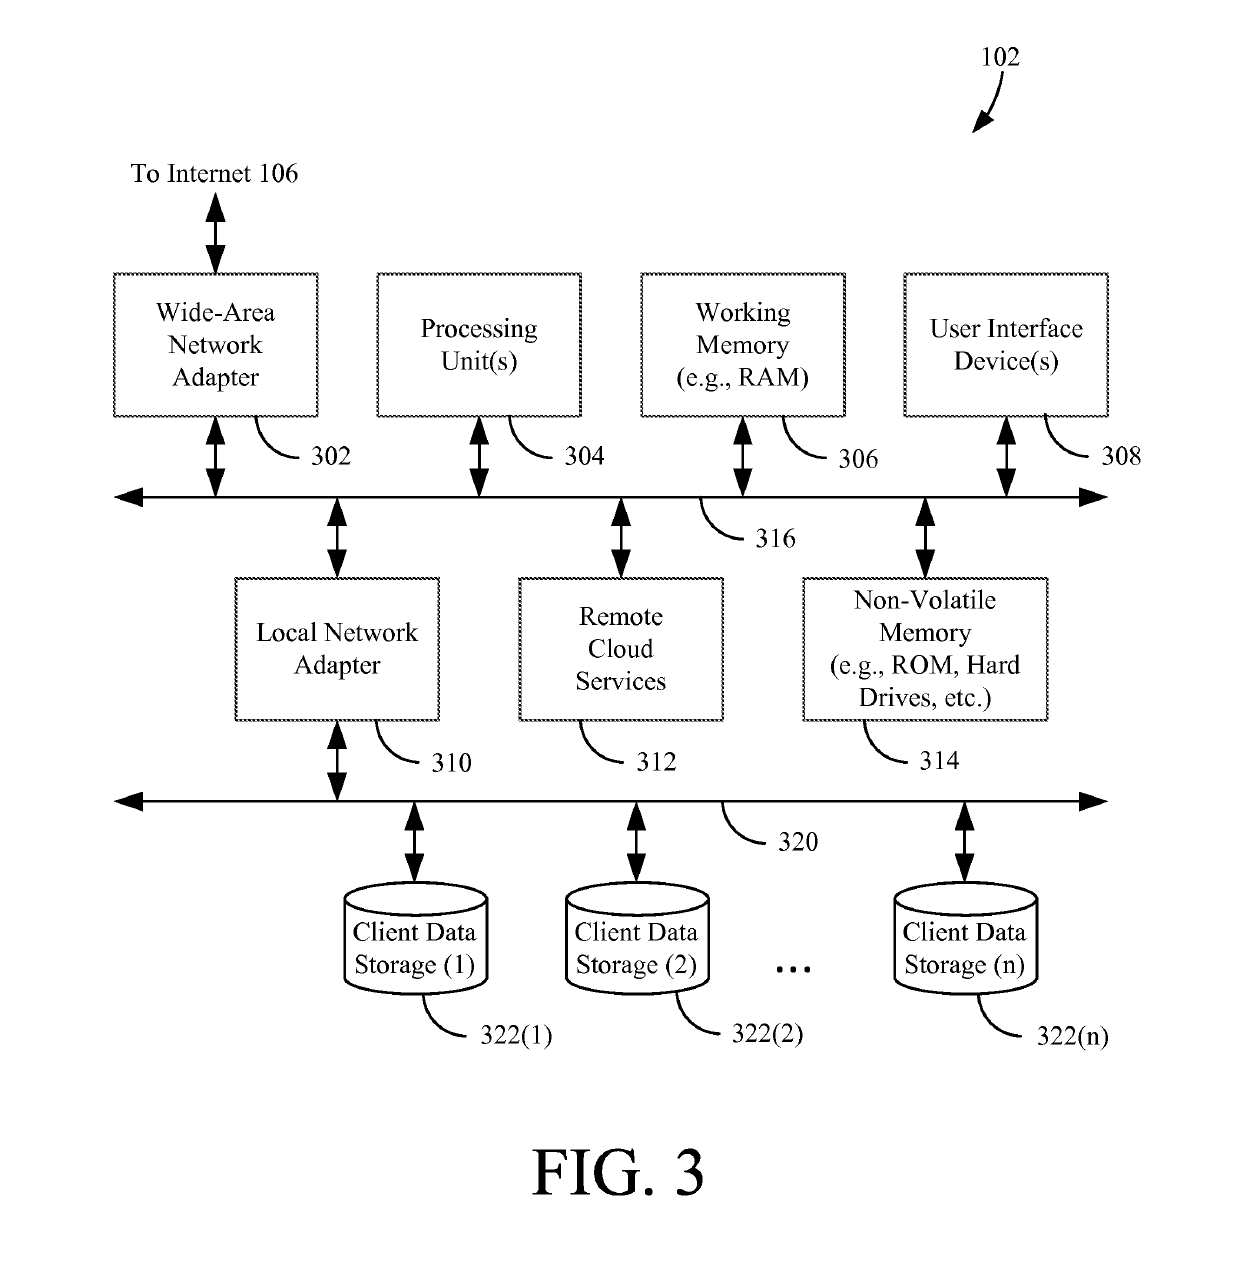 System and method for policy based synchronization of remote and local file systems